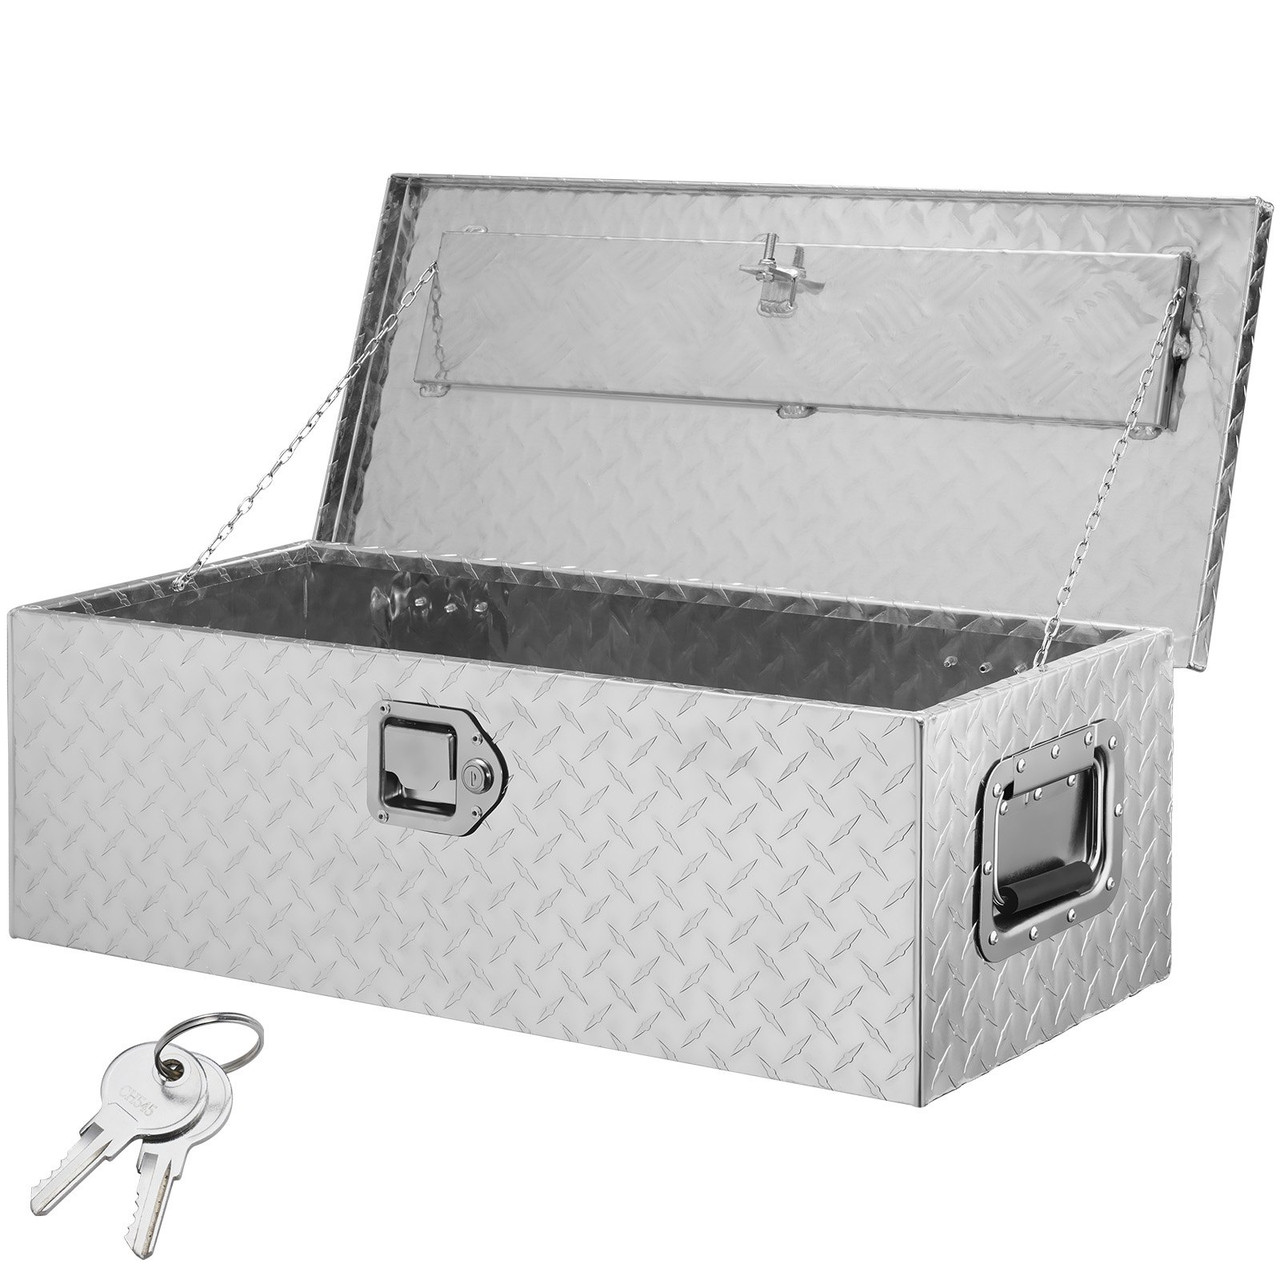 Toolbox double-sided open Bolts Double Sided Nuts Durable Tool Box